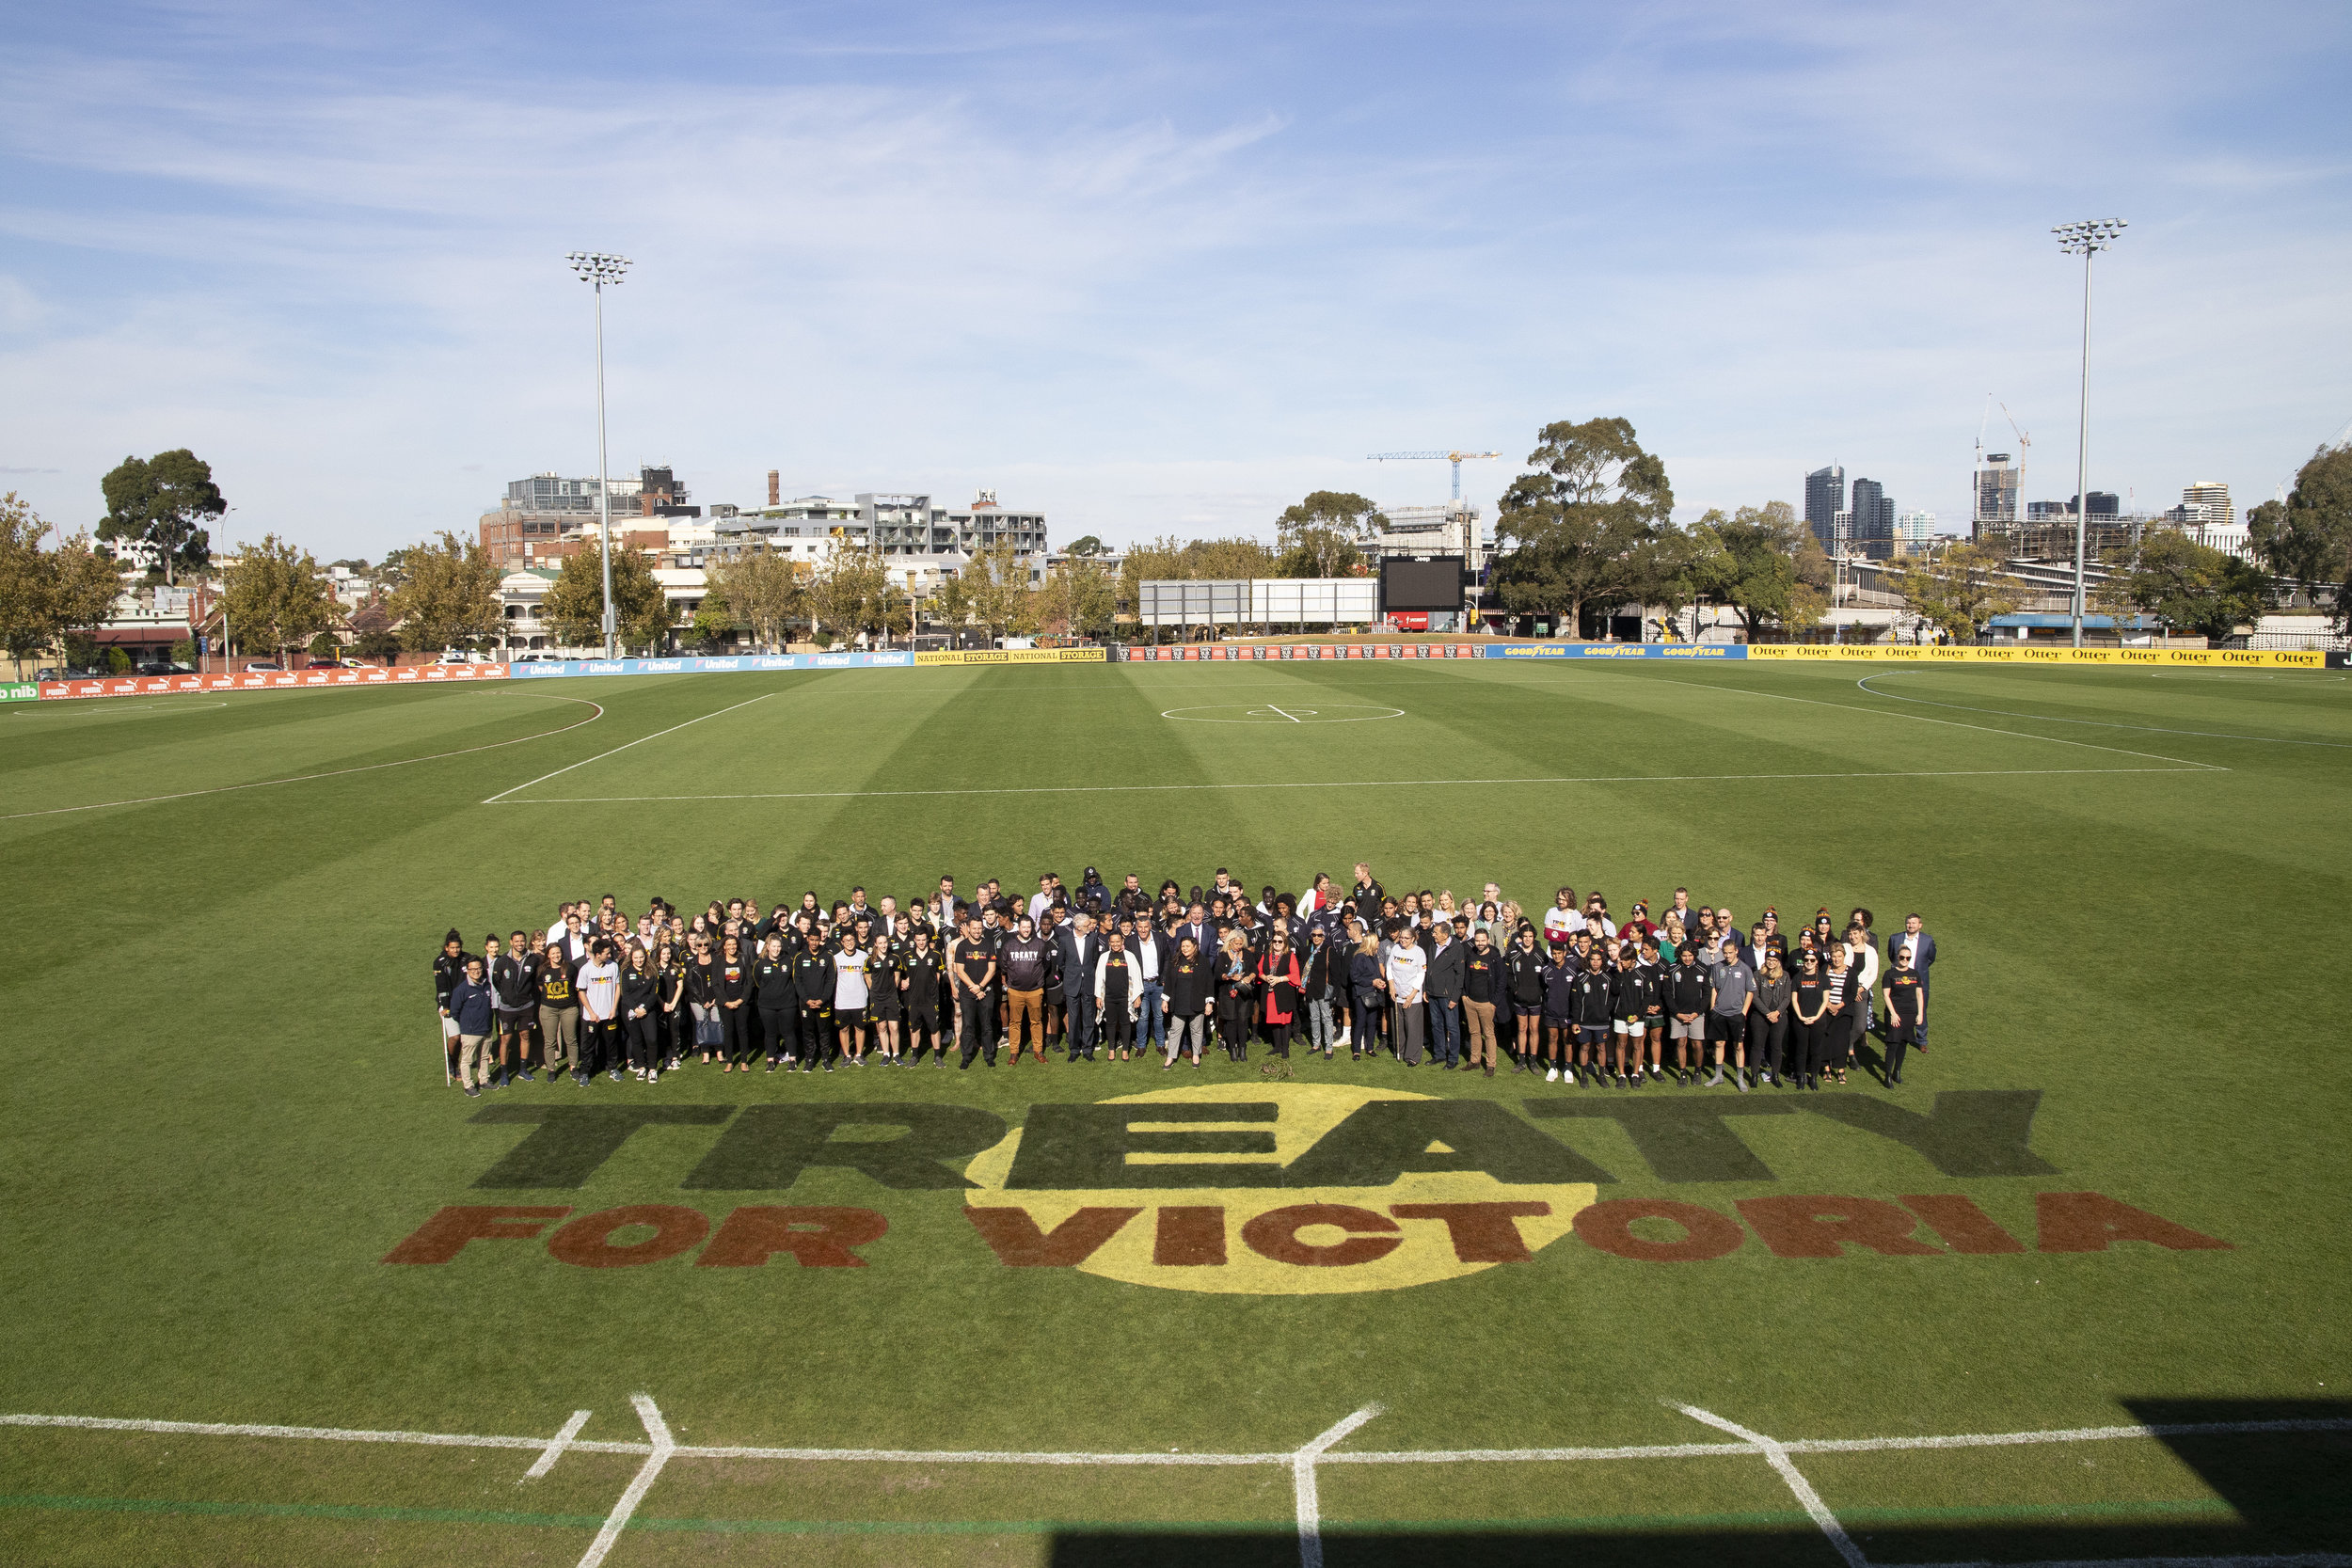 The Victorian Treaty Advancement Commission is partnering with Richmond Football Club to promote the Treaty process. The club used the annual ‘Dreamtime at the G’, played on May 25th, as an opportunity to raise awareness of Treaty.